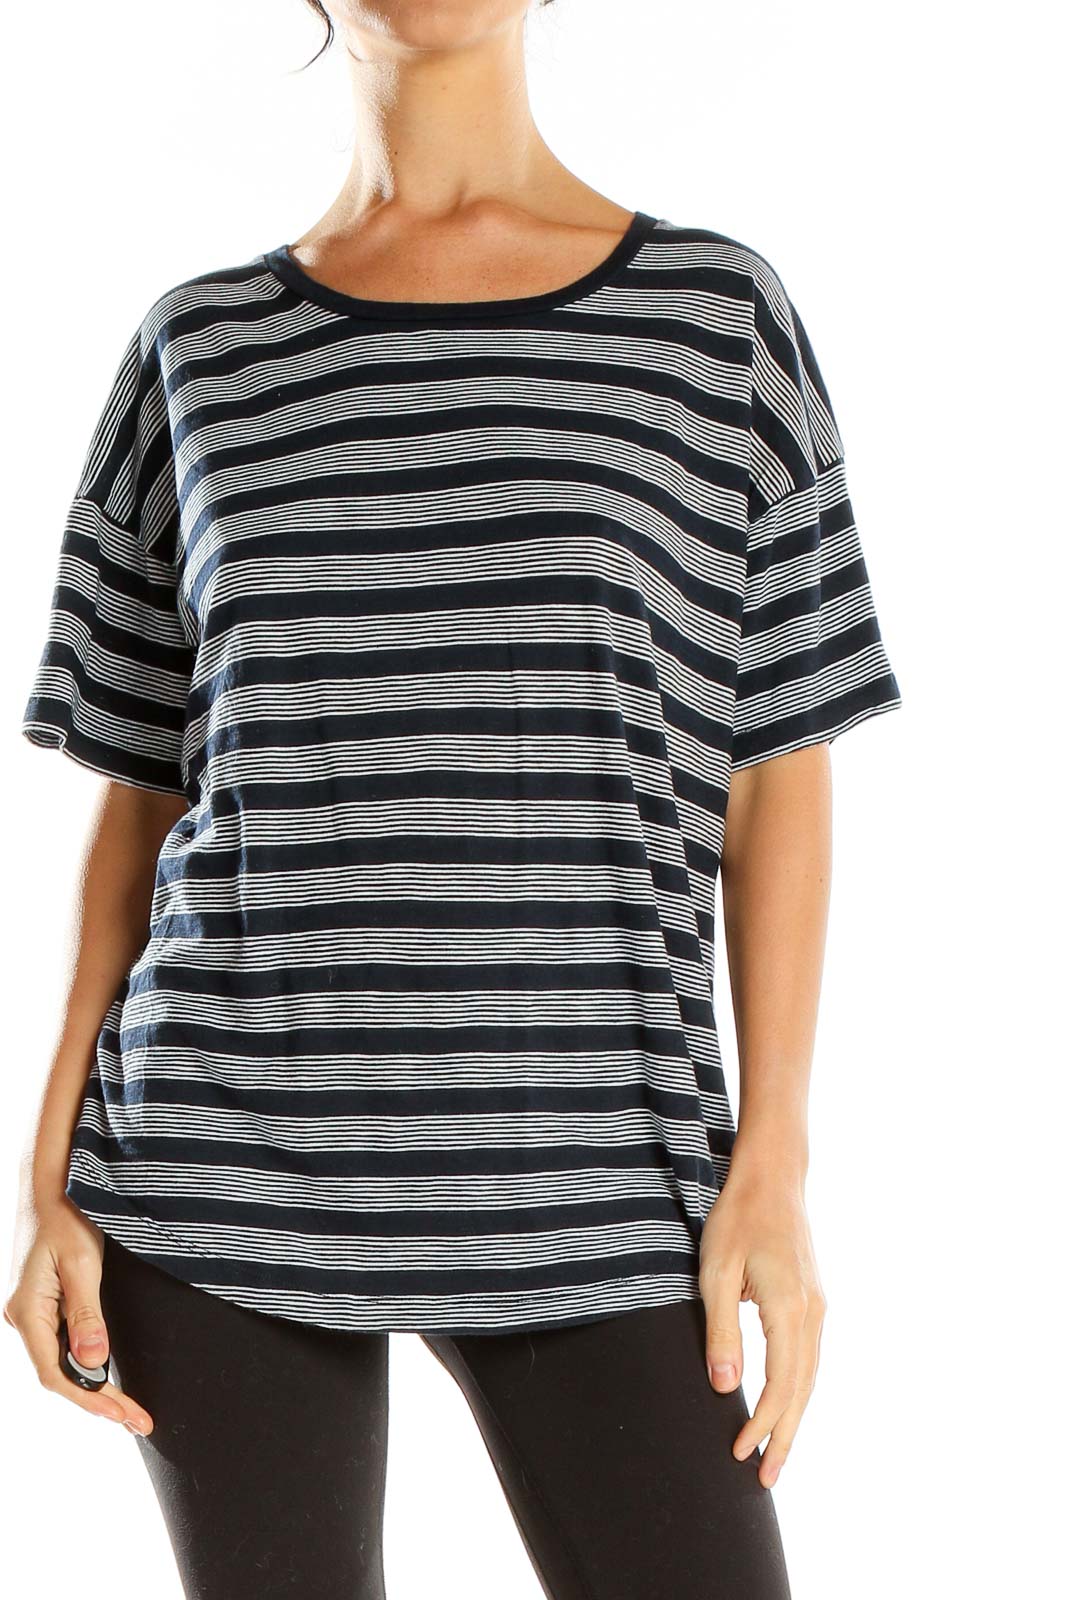 Black Gray Striped Casual T-Shirt Front